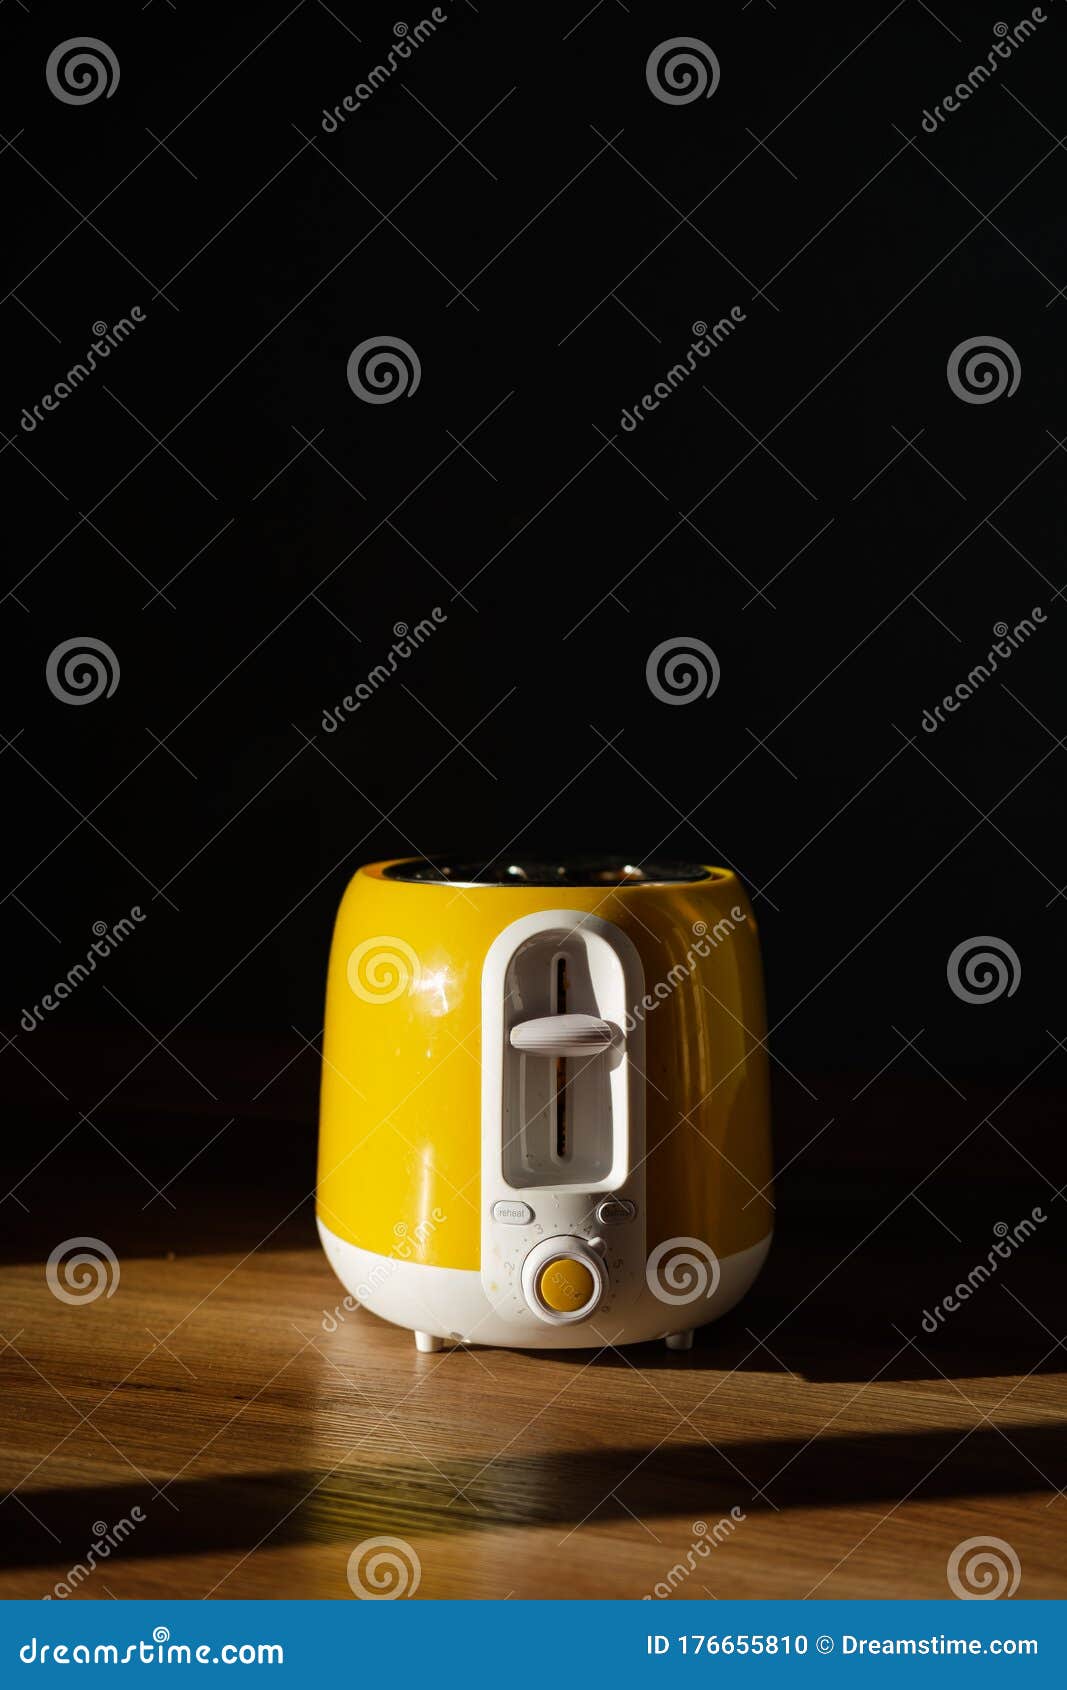 Yellow and white plastic toaster with stainless steel top. Yellow toaster kitchen utensil with stainless steel top